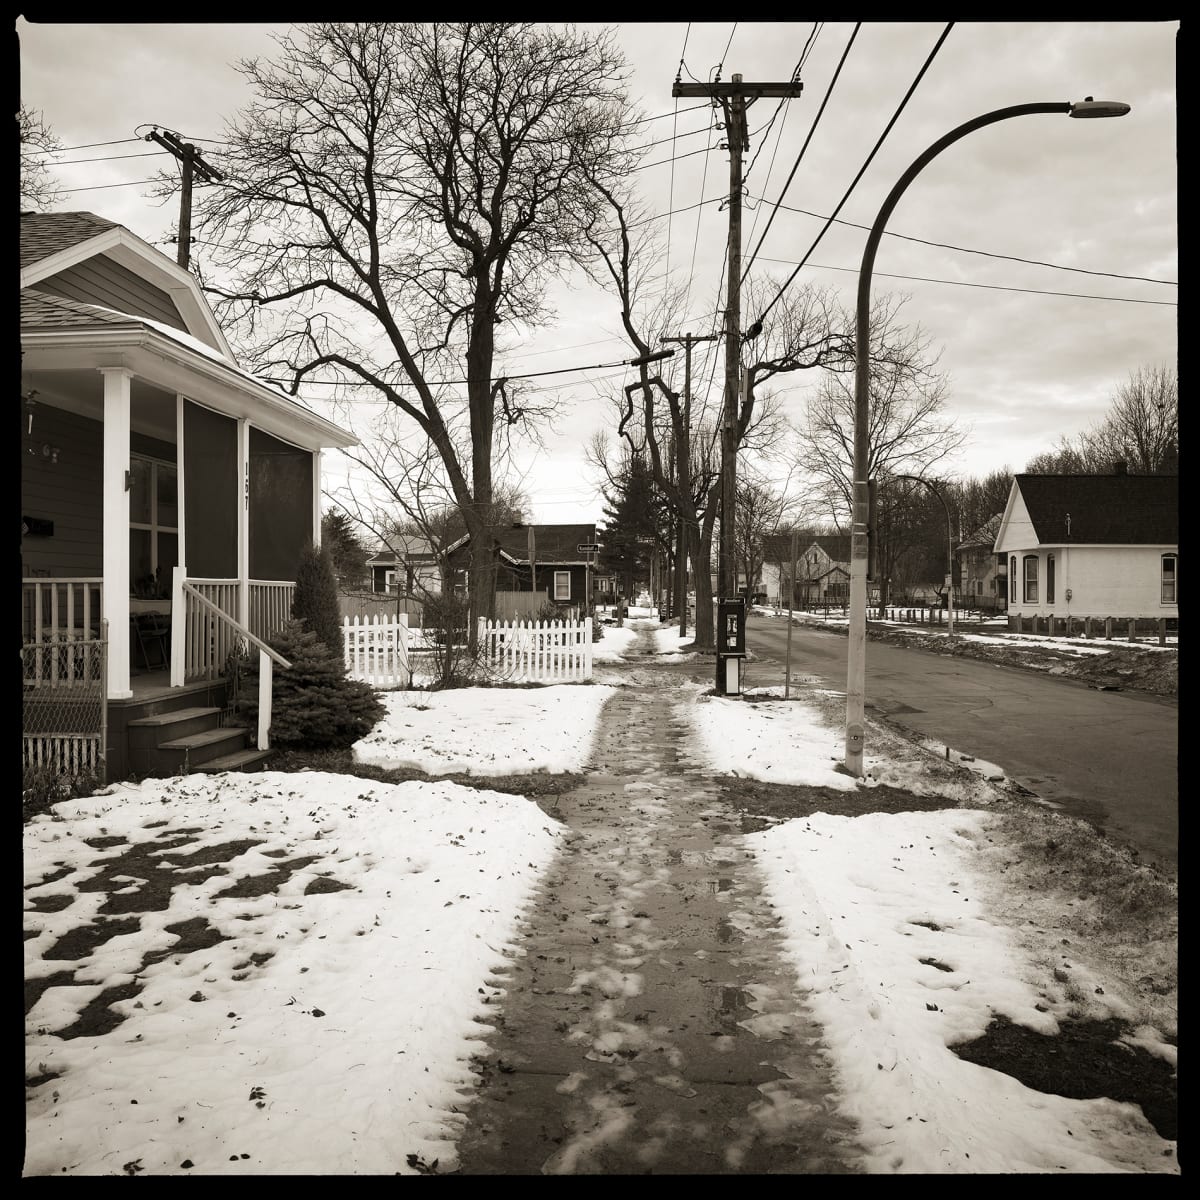 585.235.9583 – 167 Whitney Street, Rochester, NY, 14611 by Eric T. Kunsman  Image: ID: A black and white image shows a snowy sidewalk in a residential area.  Houses are on the left and the road is to the right.  There is a payphone next to a telephone pole to the right of the sidewalk. 